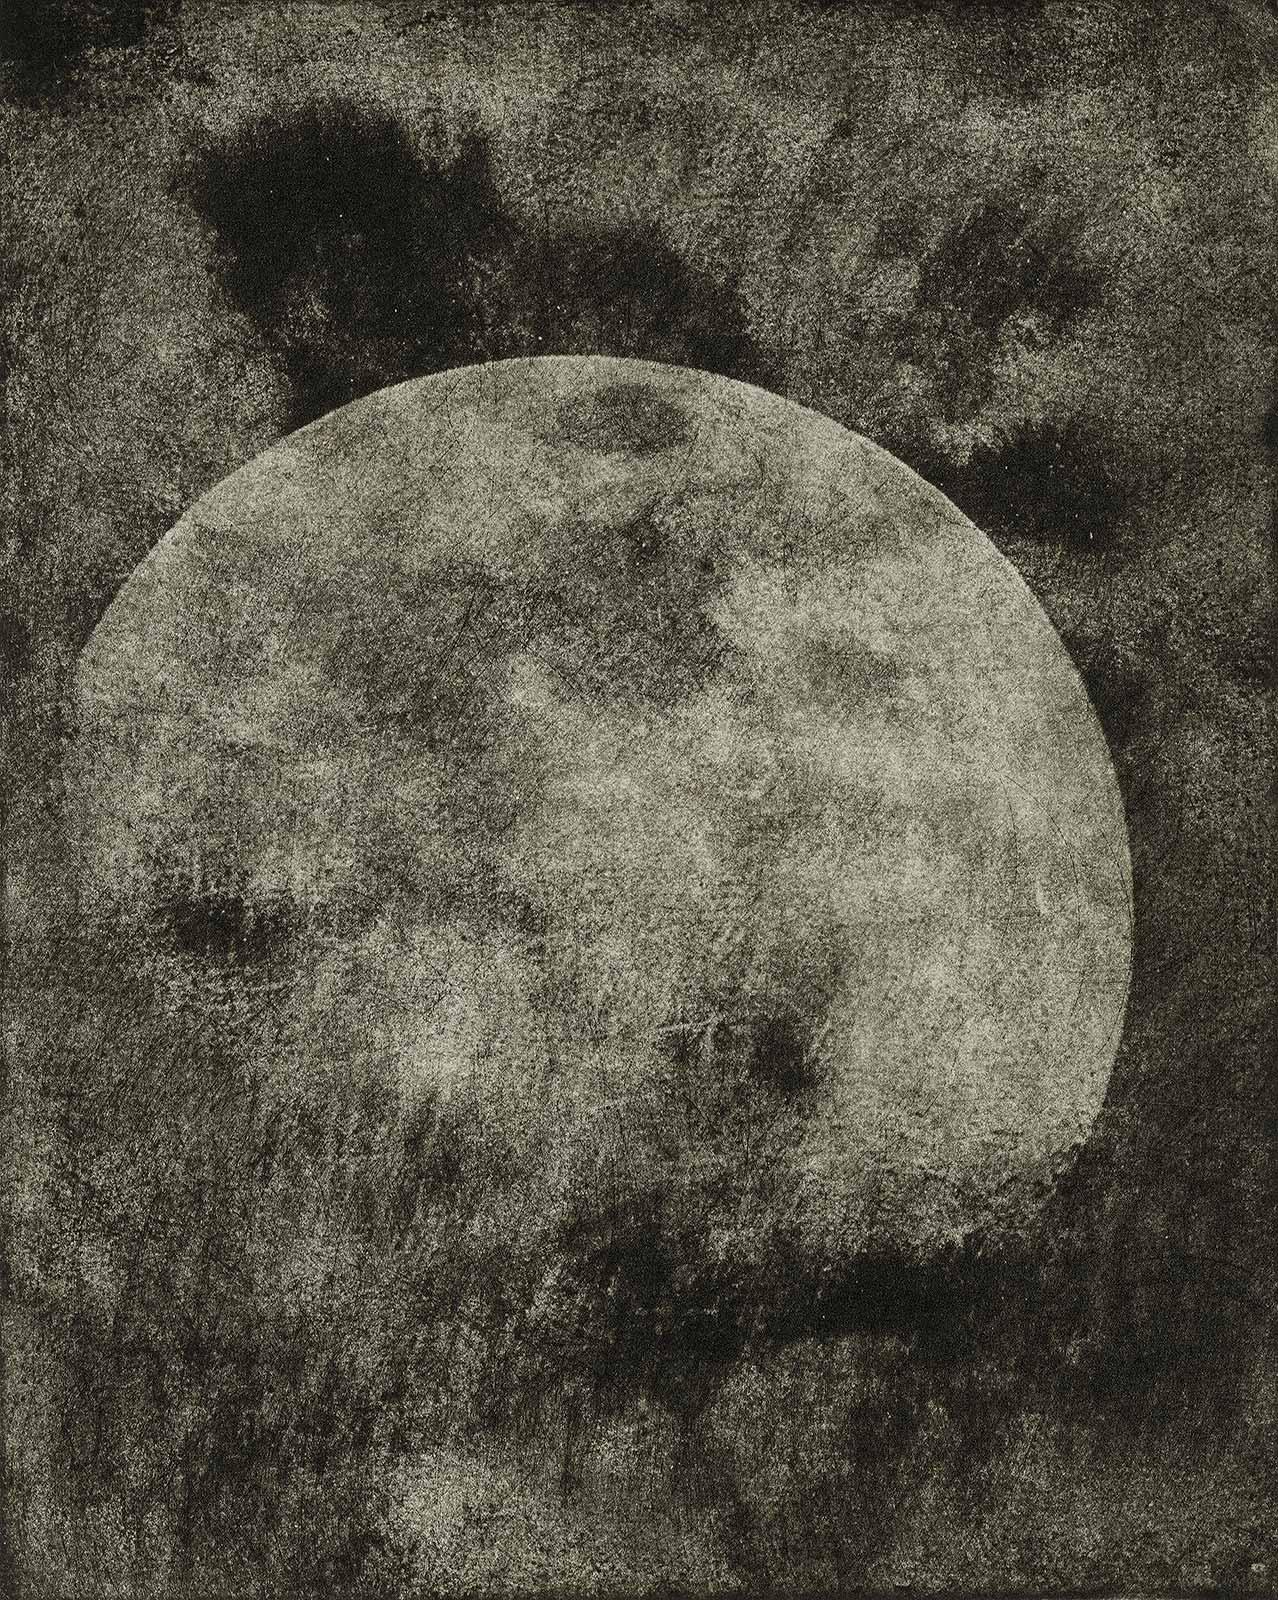 Ted Kincaid Landscape Photograph - Moon ( from the artist's Lunar Series)